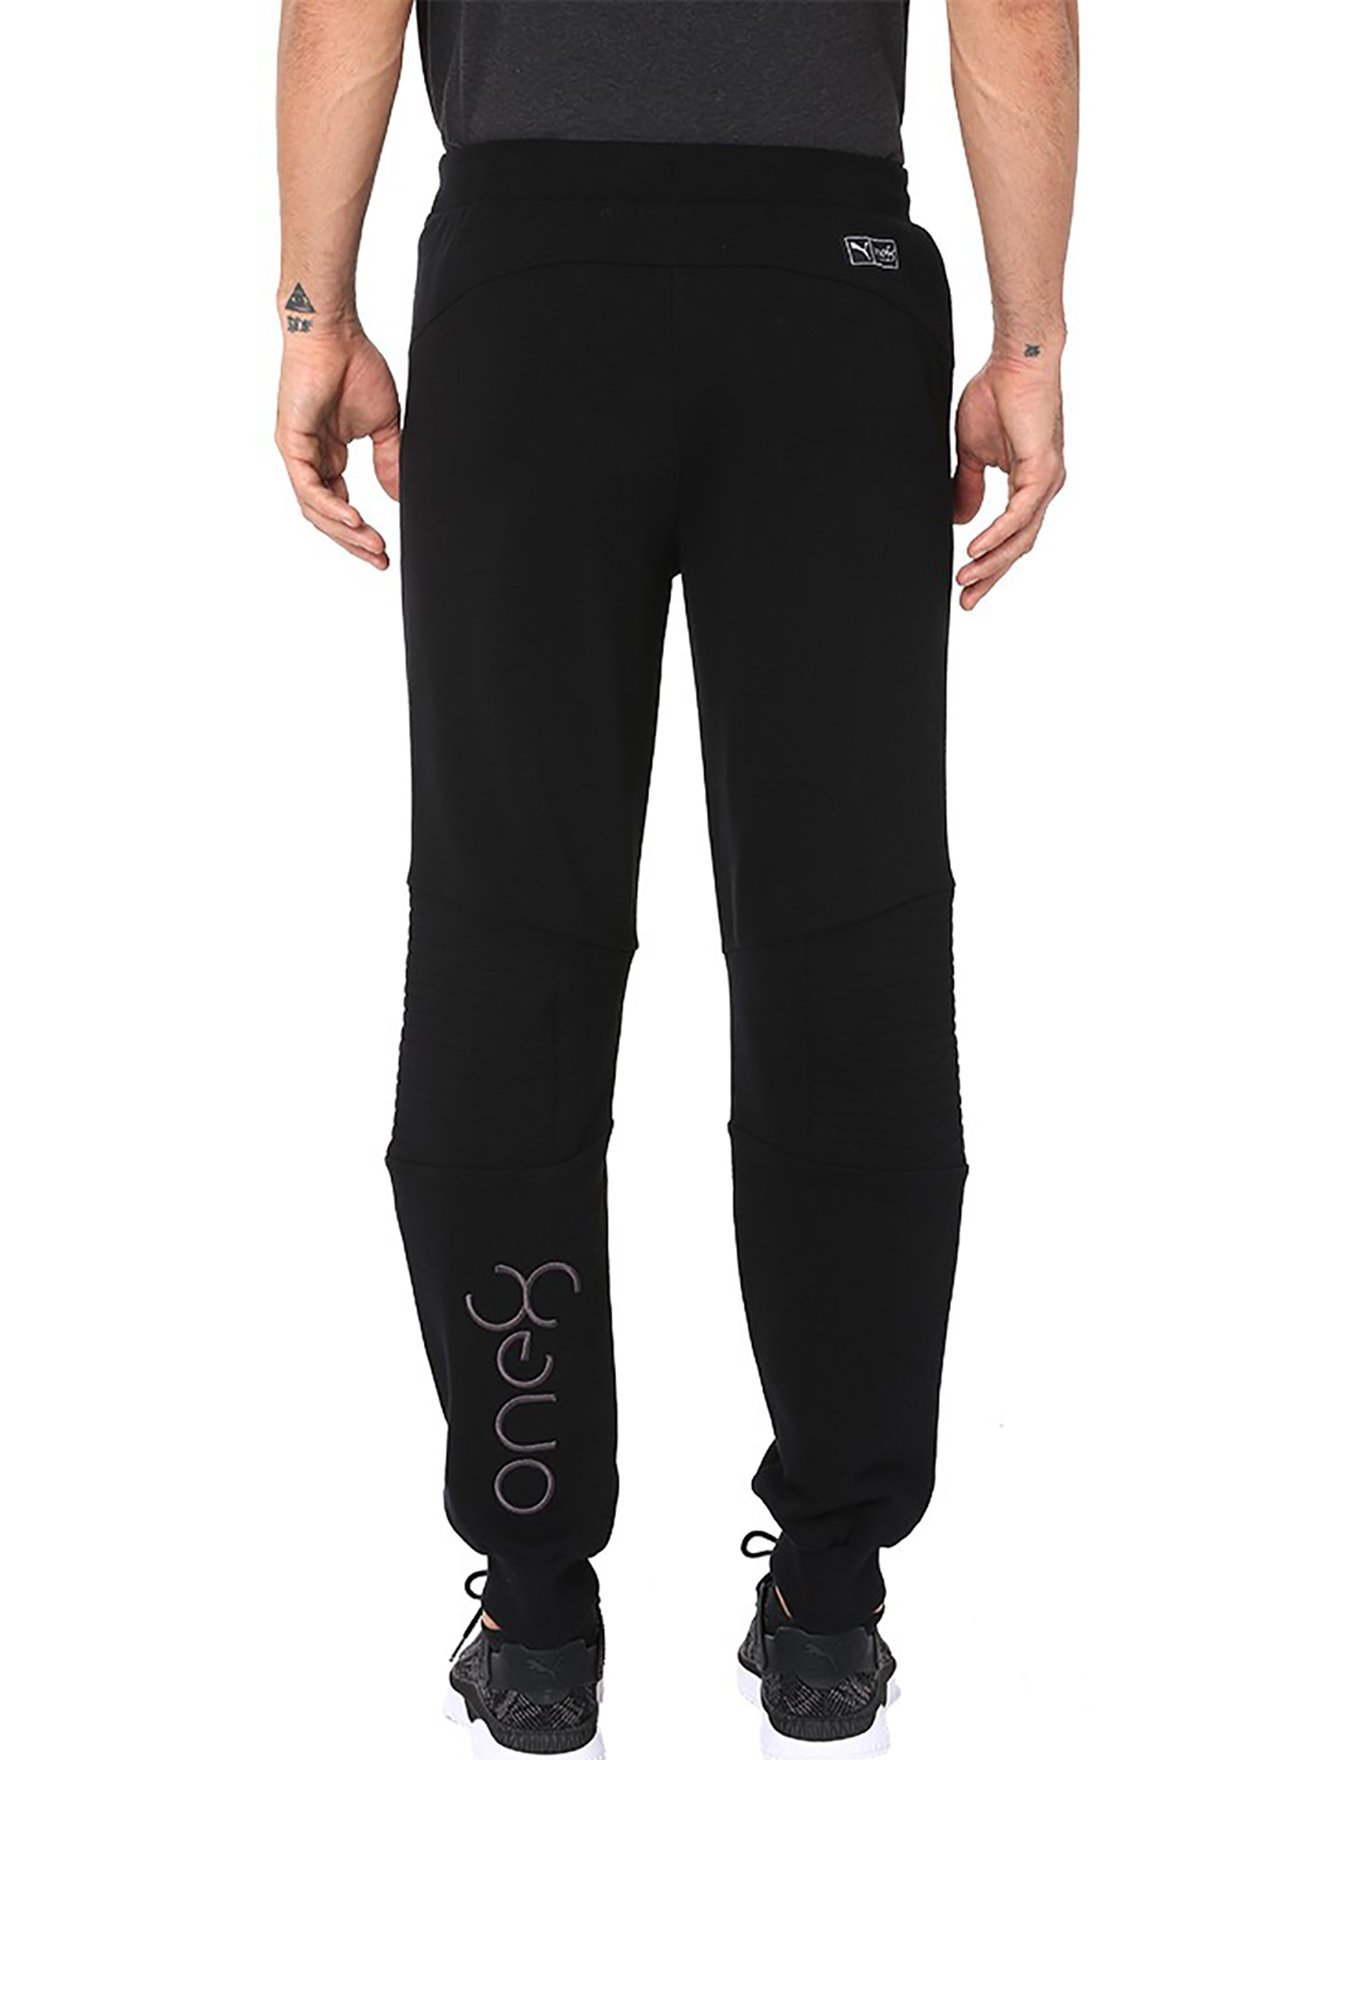 DESI NIT Men's Lycra Stretchable Regular Fit Stylish Cargo Style Joggers  Track Pant Lower Pyjama One 8 Black Trackpant - L : Amazon.in: Health &  Personal Care